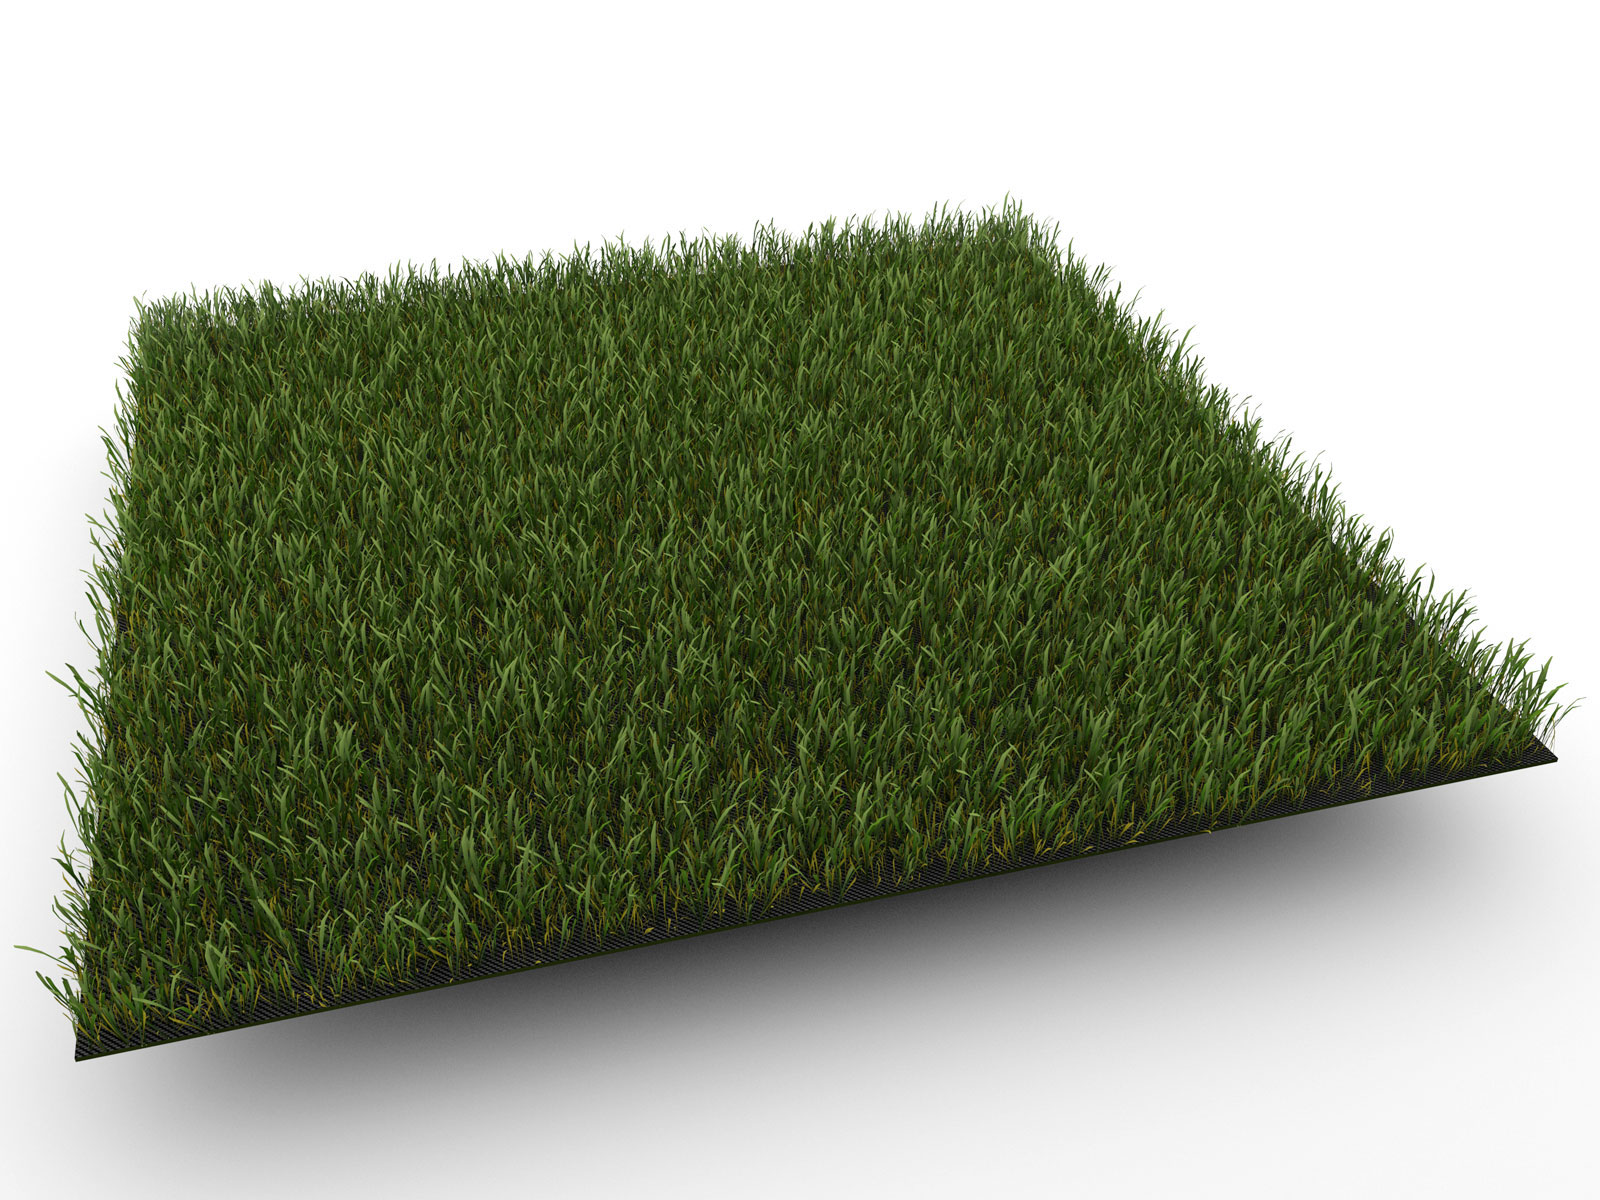 3D Realistic Product Model of Synthetic Lawn top view